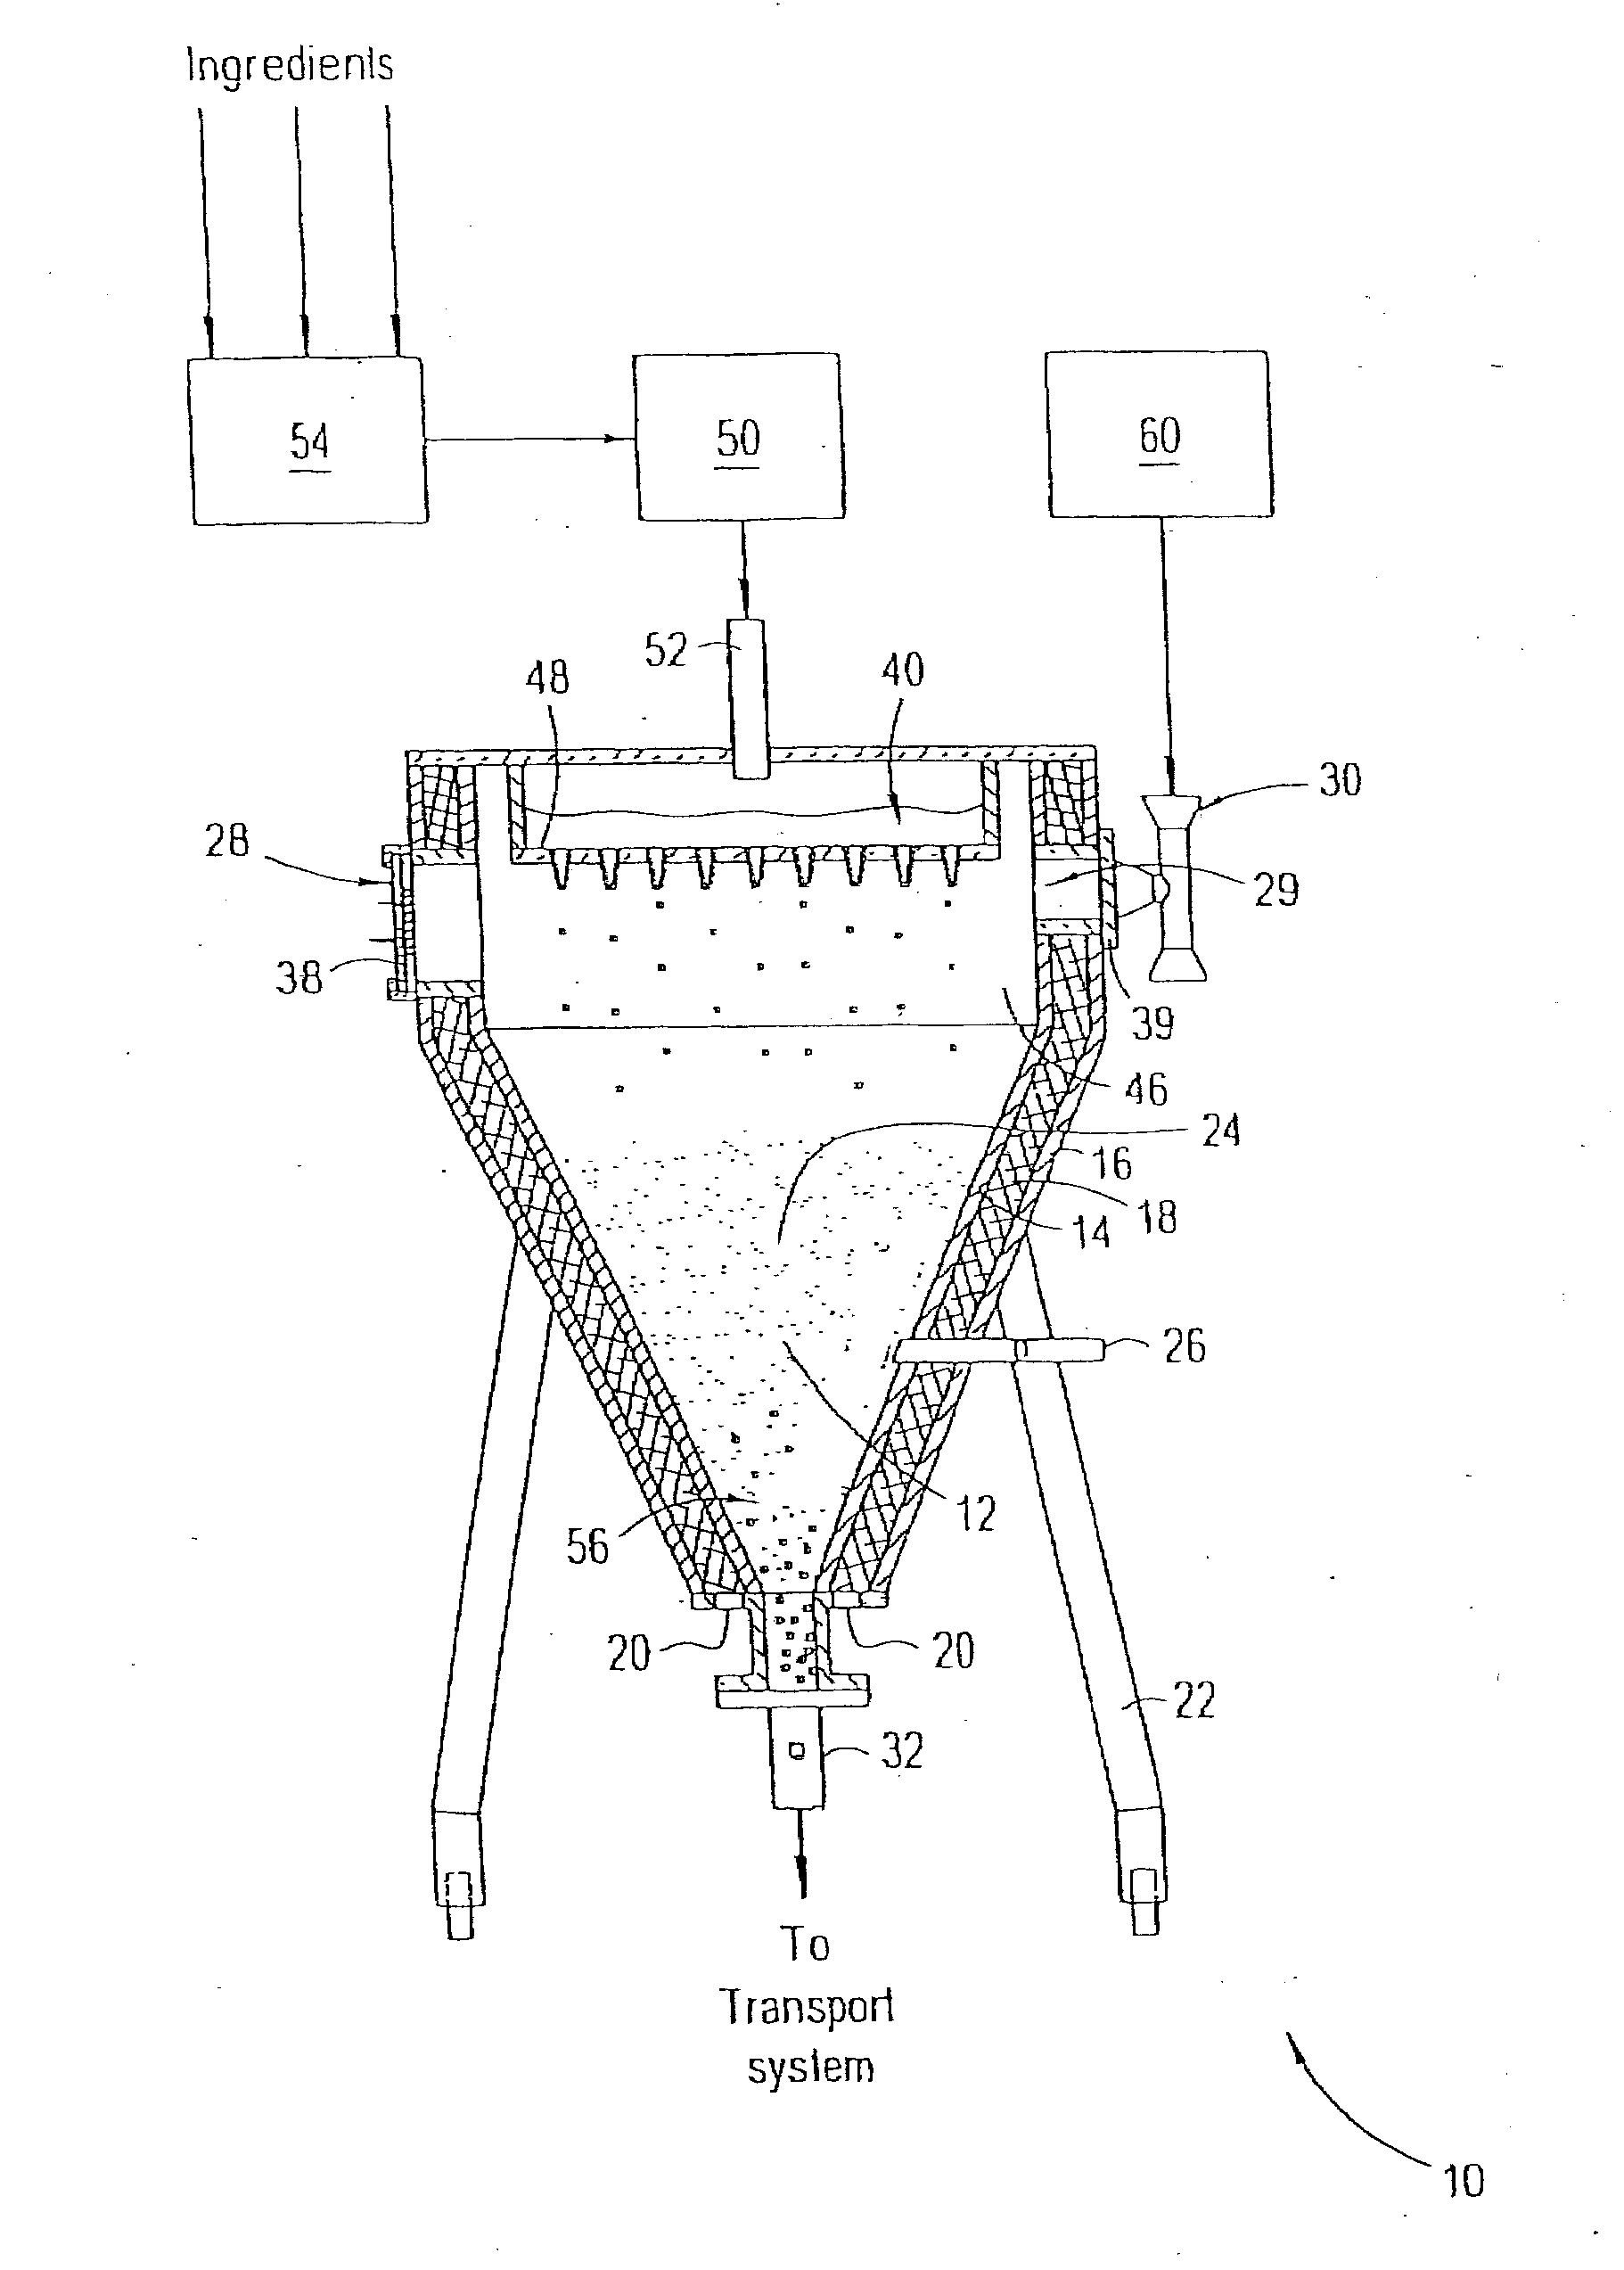 Method and system for flash freezing whey liquid and making beverages therefrom